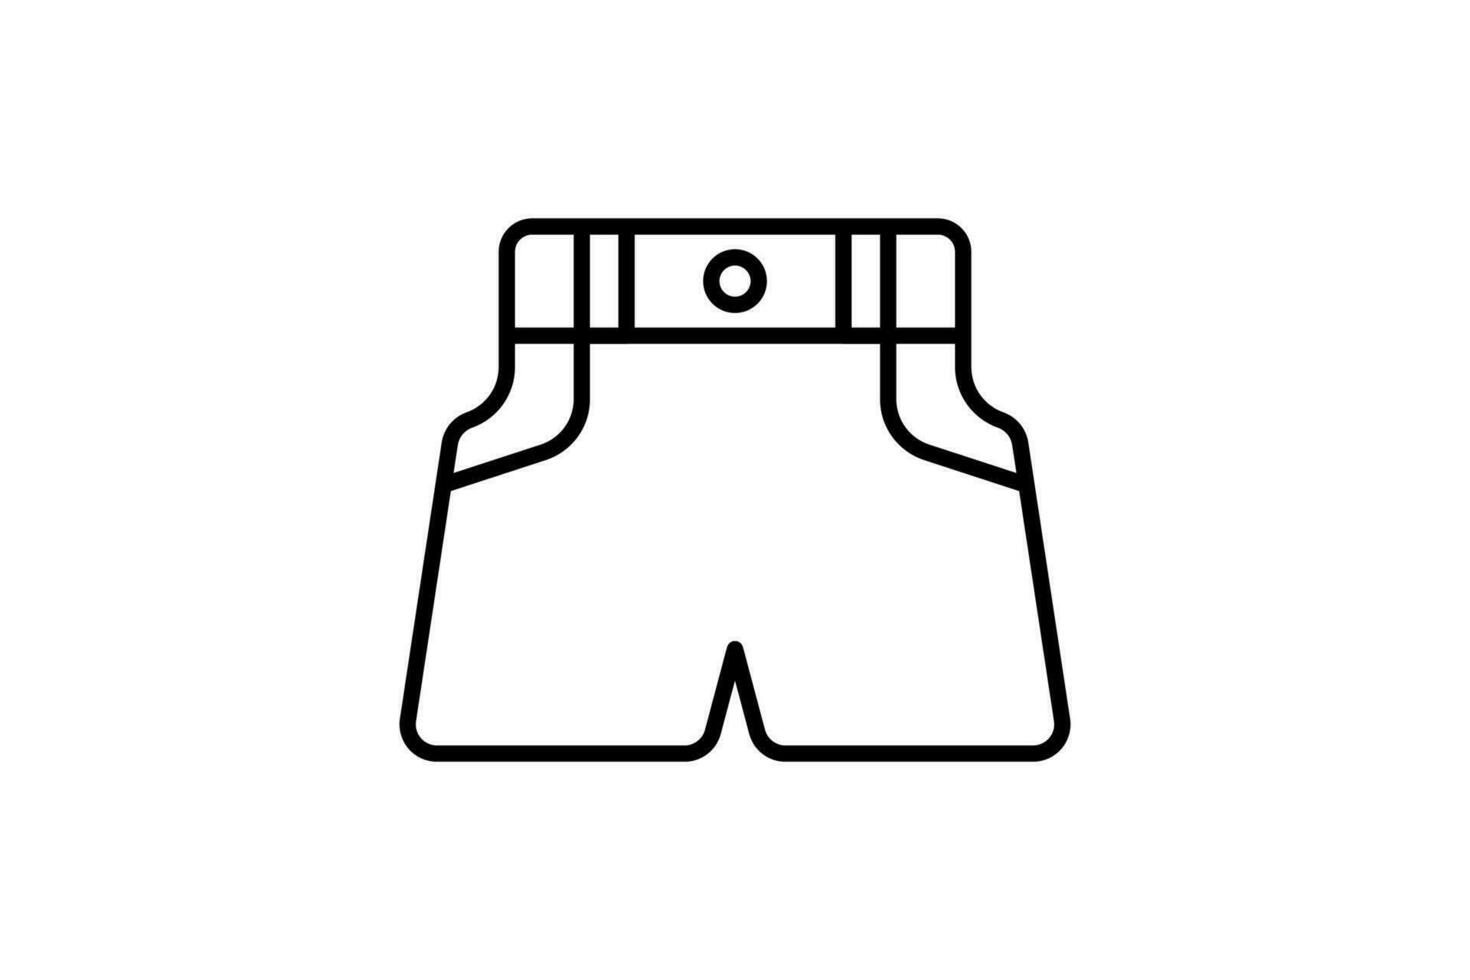 Shorts Heels Icon. Icon related to clothes icon set. line icon style. Simple vector design editable